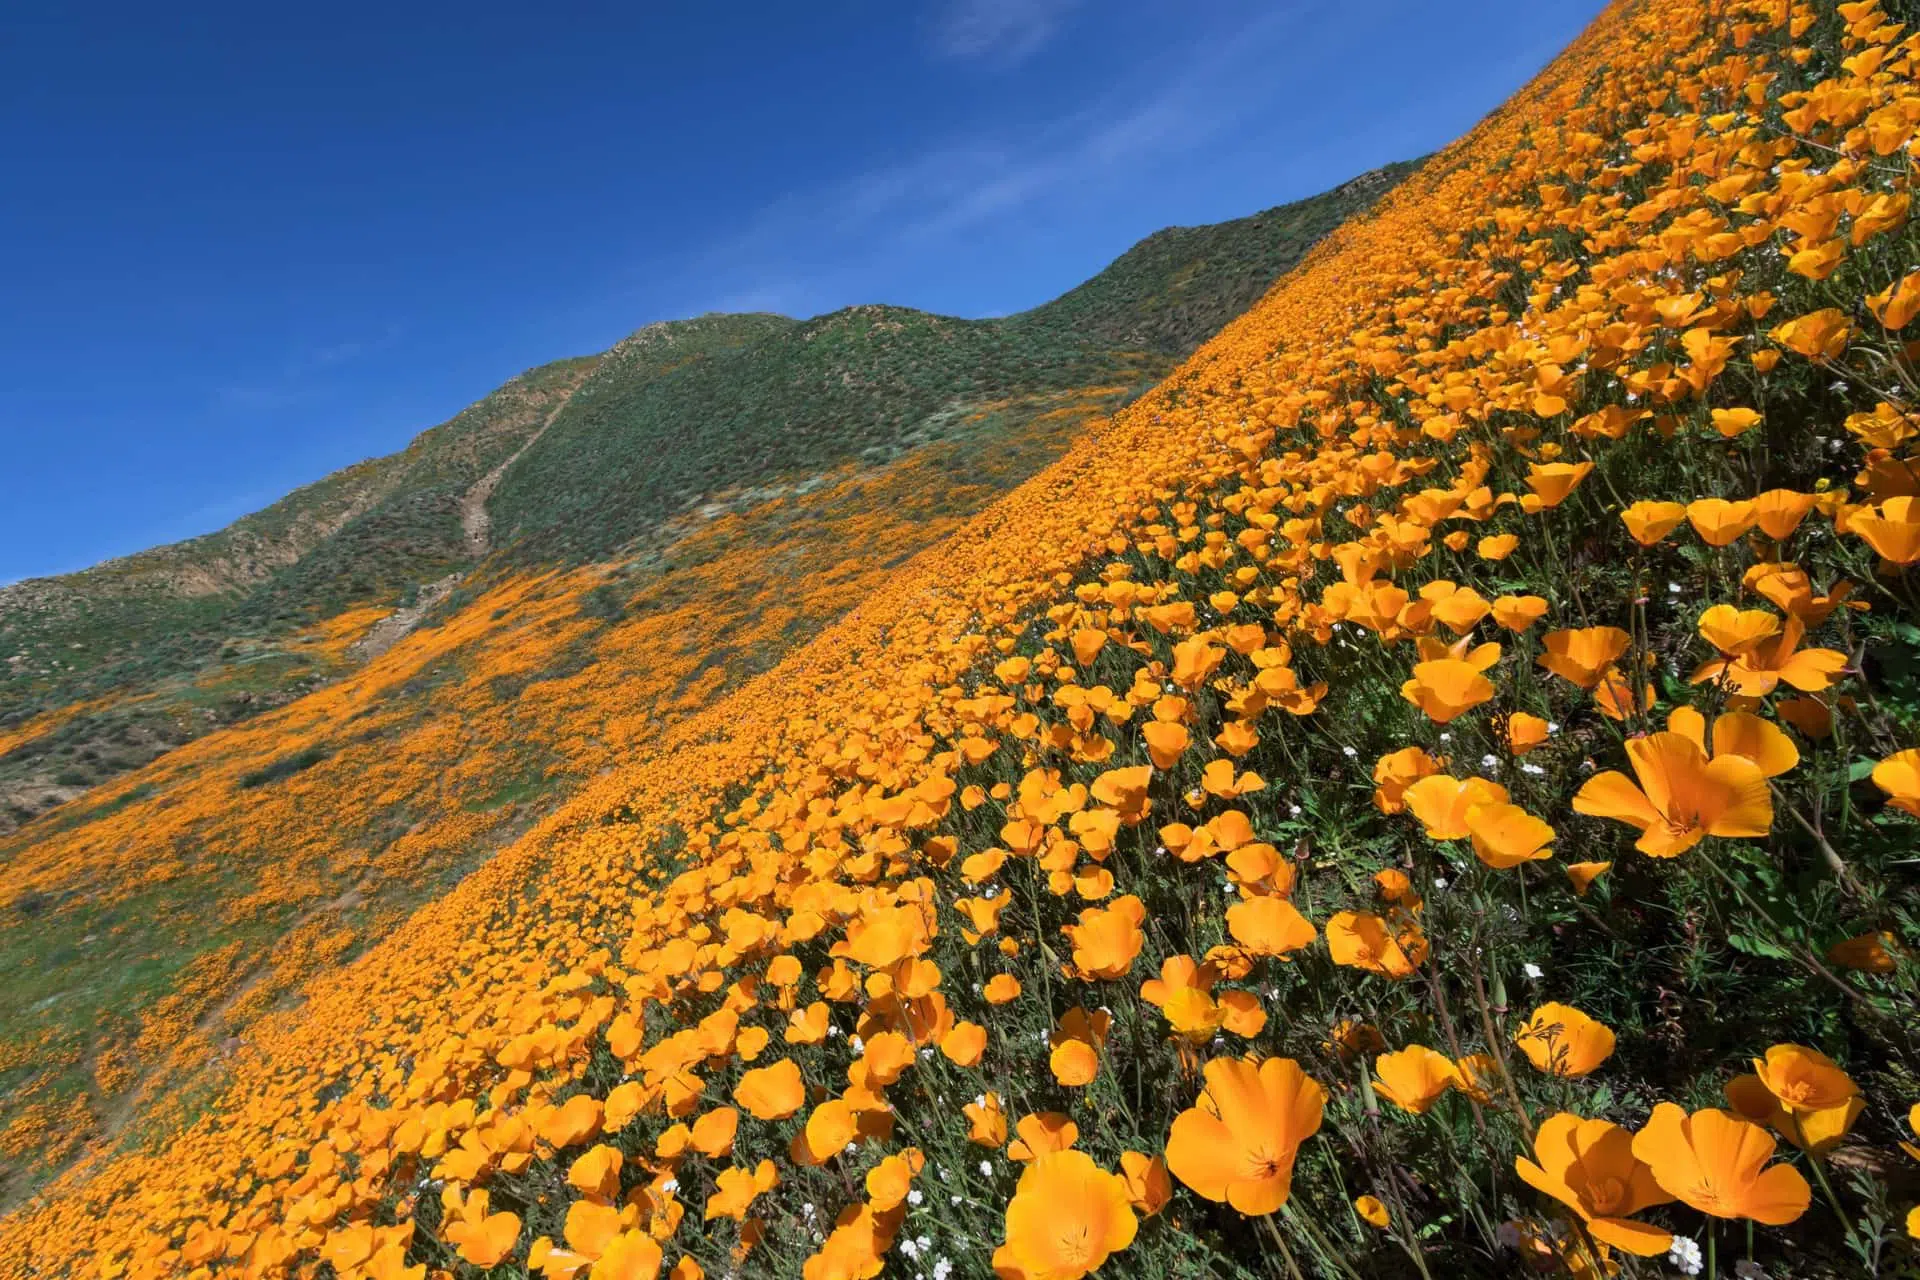 Image of the California poppy bloom that is causing drivers to stop on the freeway